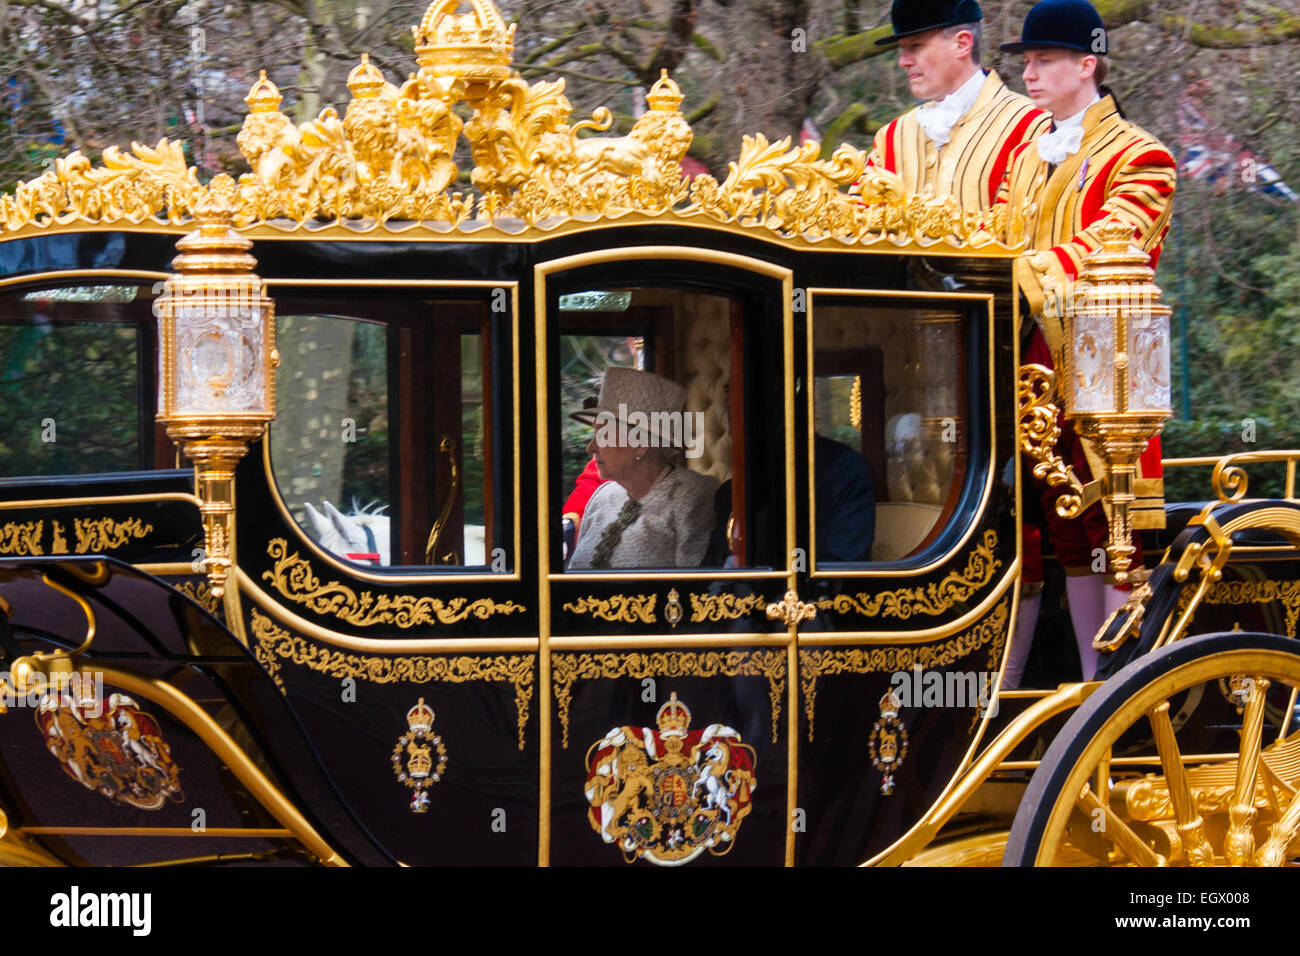 London, UK. 3rd March, 2015. Mexican President Enrique Pena Nieto travels with Her Majesty The Queen and other members of the Royal Family by State Carriage along the Mall towards a luncheon at Buckingham Palace after a ceremonial welcome at Horseguards Parade. PICTURED: Her Majesty the Queen, Elizabeth II travels with Mexican President Enrique Pena Nieto in the State Carriage. PICTURED: Her Majesty the Queen, Elizabeth II travels with Mexican President Enrique Pena Nieto in the State Carriage. Credit:  Paul Davey/Alamy Live News Stock Photo